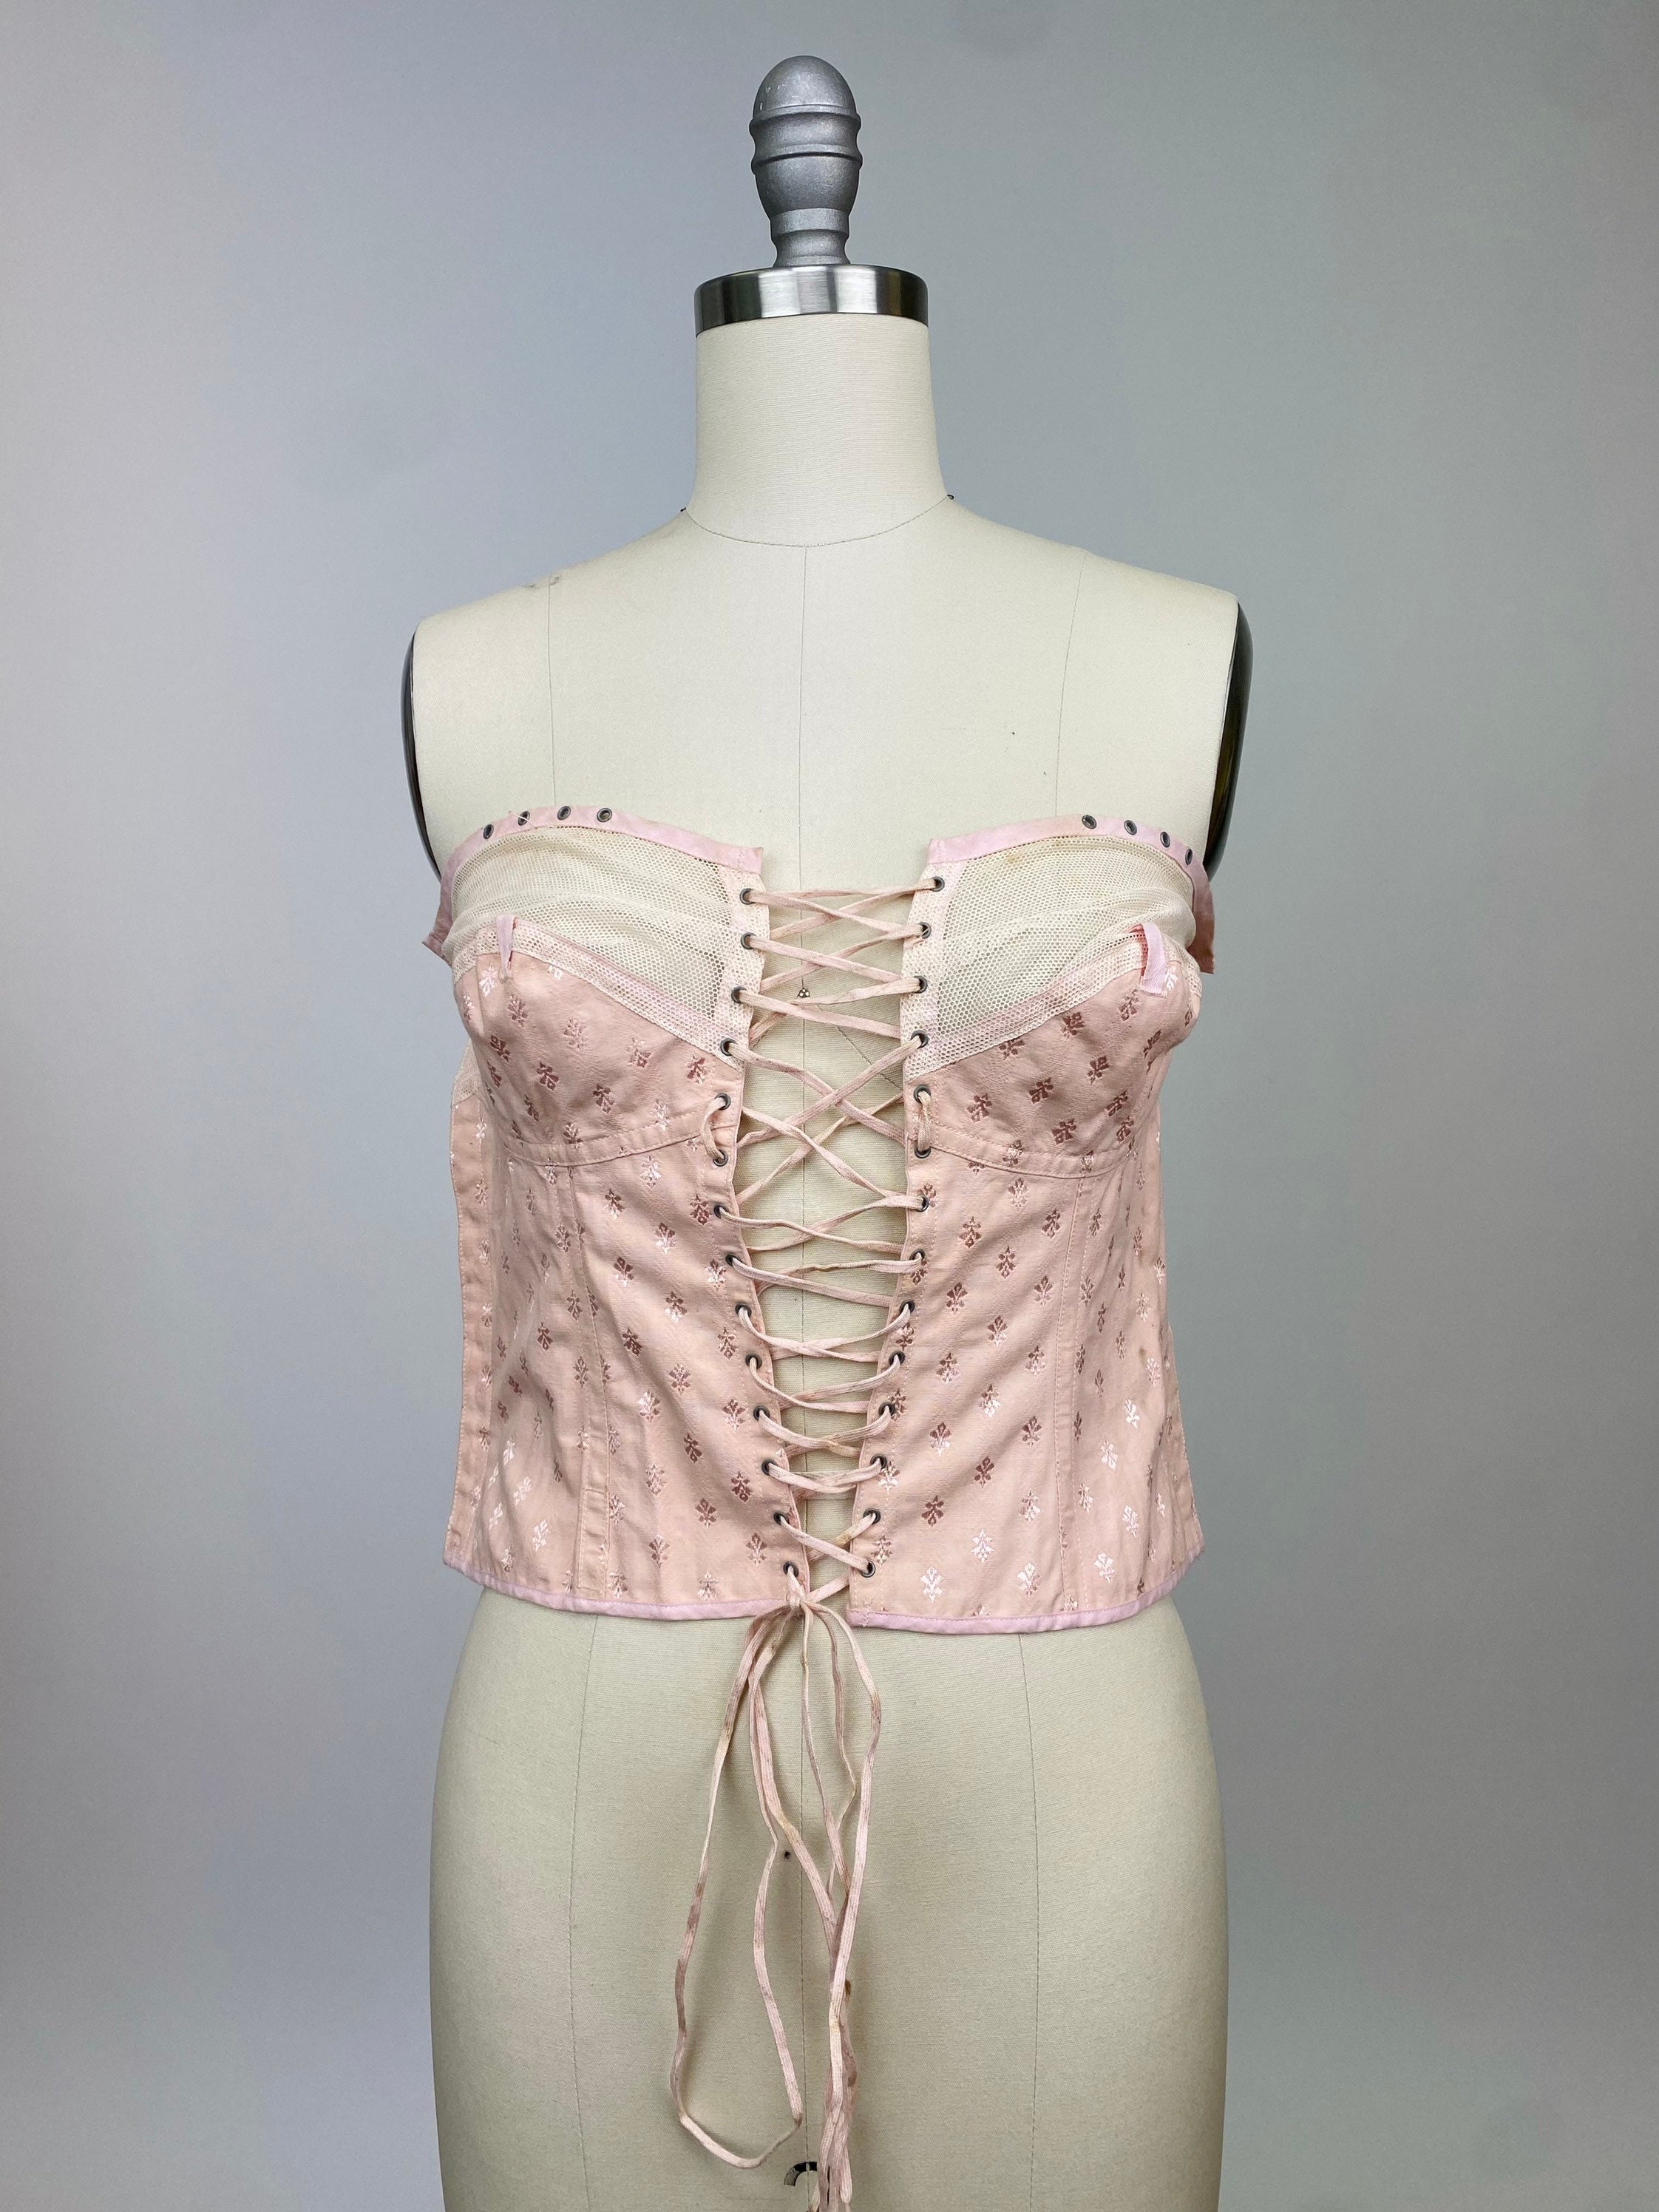 Rare Vintage Early 1900s Spirella Corset, Bustier, Lace up Undergarment,  Body Shaper, Pale Blush Pink, Front Only -  Israel